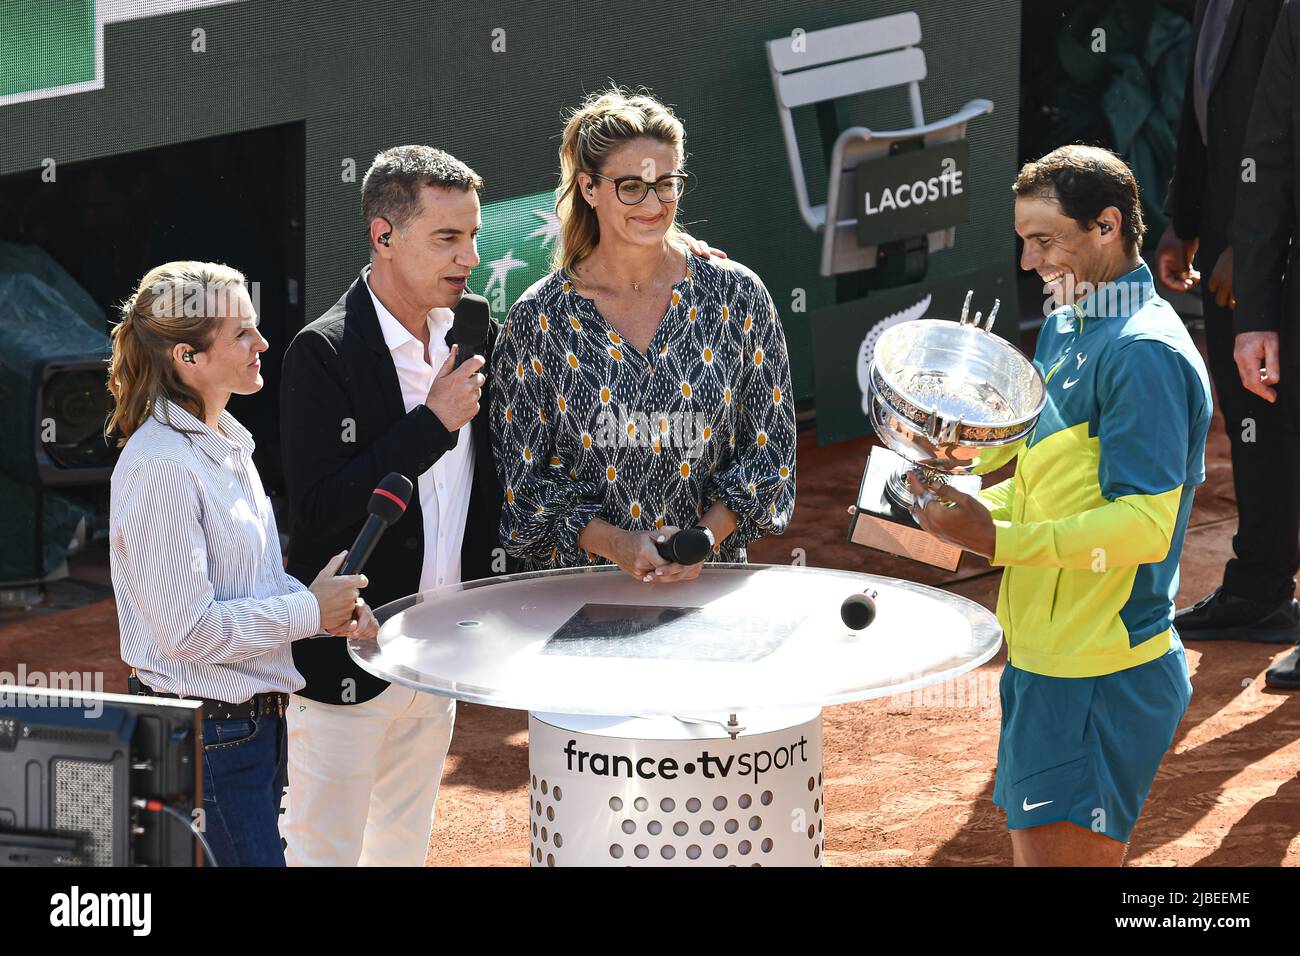 Paris, France - 05/06/2022, Rafael 'Rafa' Nadal of Spain with the trophy is interviewed by the French television channel 'France Televisions' ('France TV Sport', 'France 2') with Justine Henin, Laurent Luyat and Mary Pierce after the French Open final against Casper Ruud, Grand Slam tennis tournament on June 5, 2022 at Roland-Garros stadium in Paris, France - Photo: Victor Joly/DPPI/LiveMedia Stock Photo